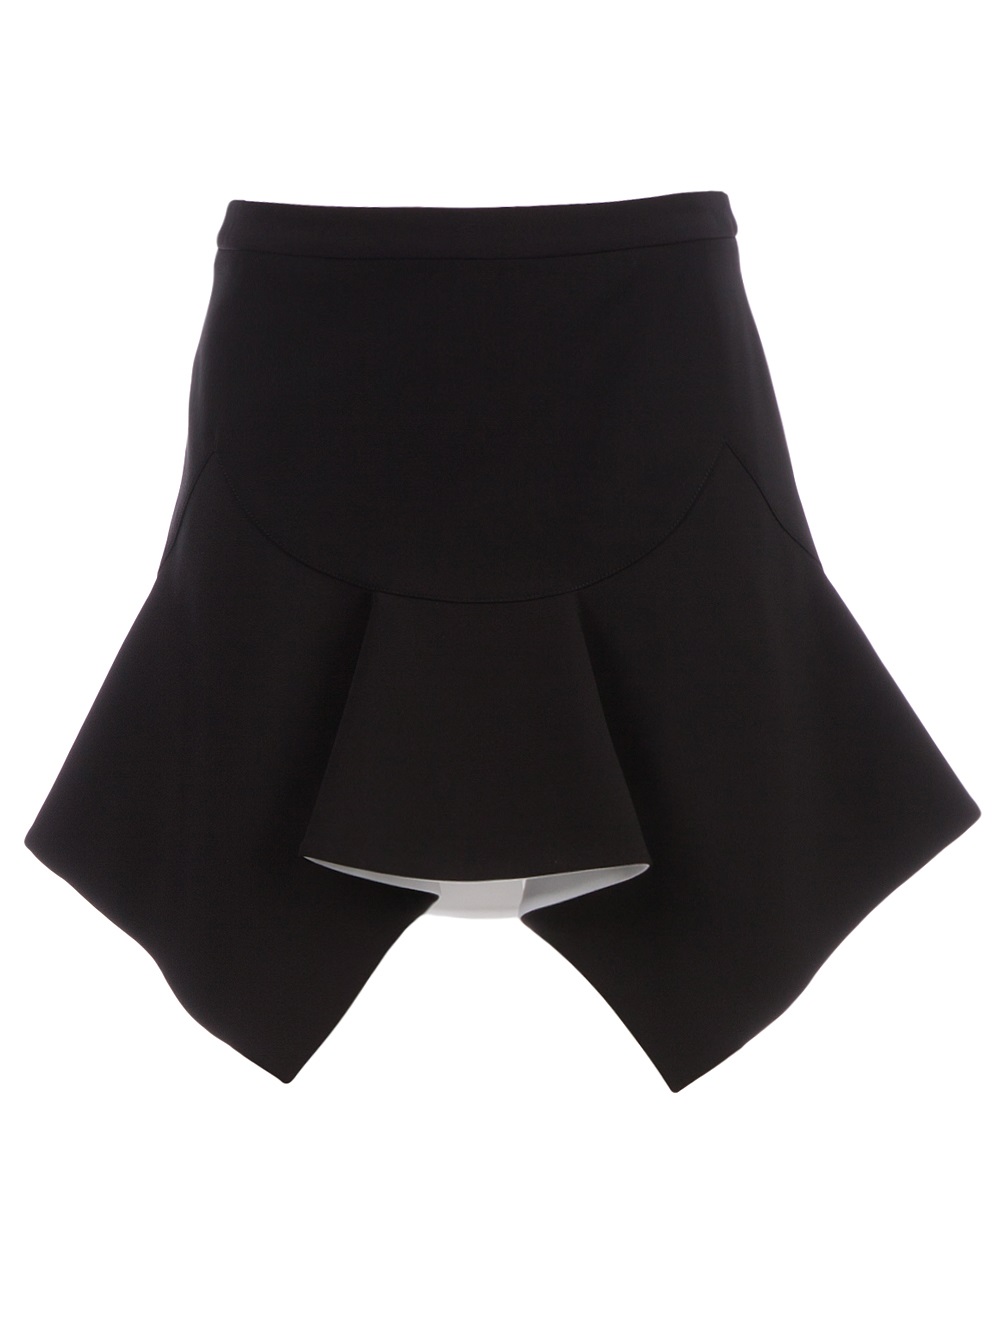 Lyst - Givenchy Givenchy Structured Pleat Skirt in Black